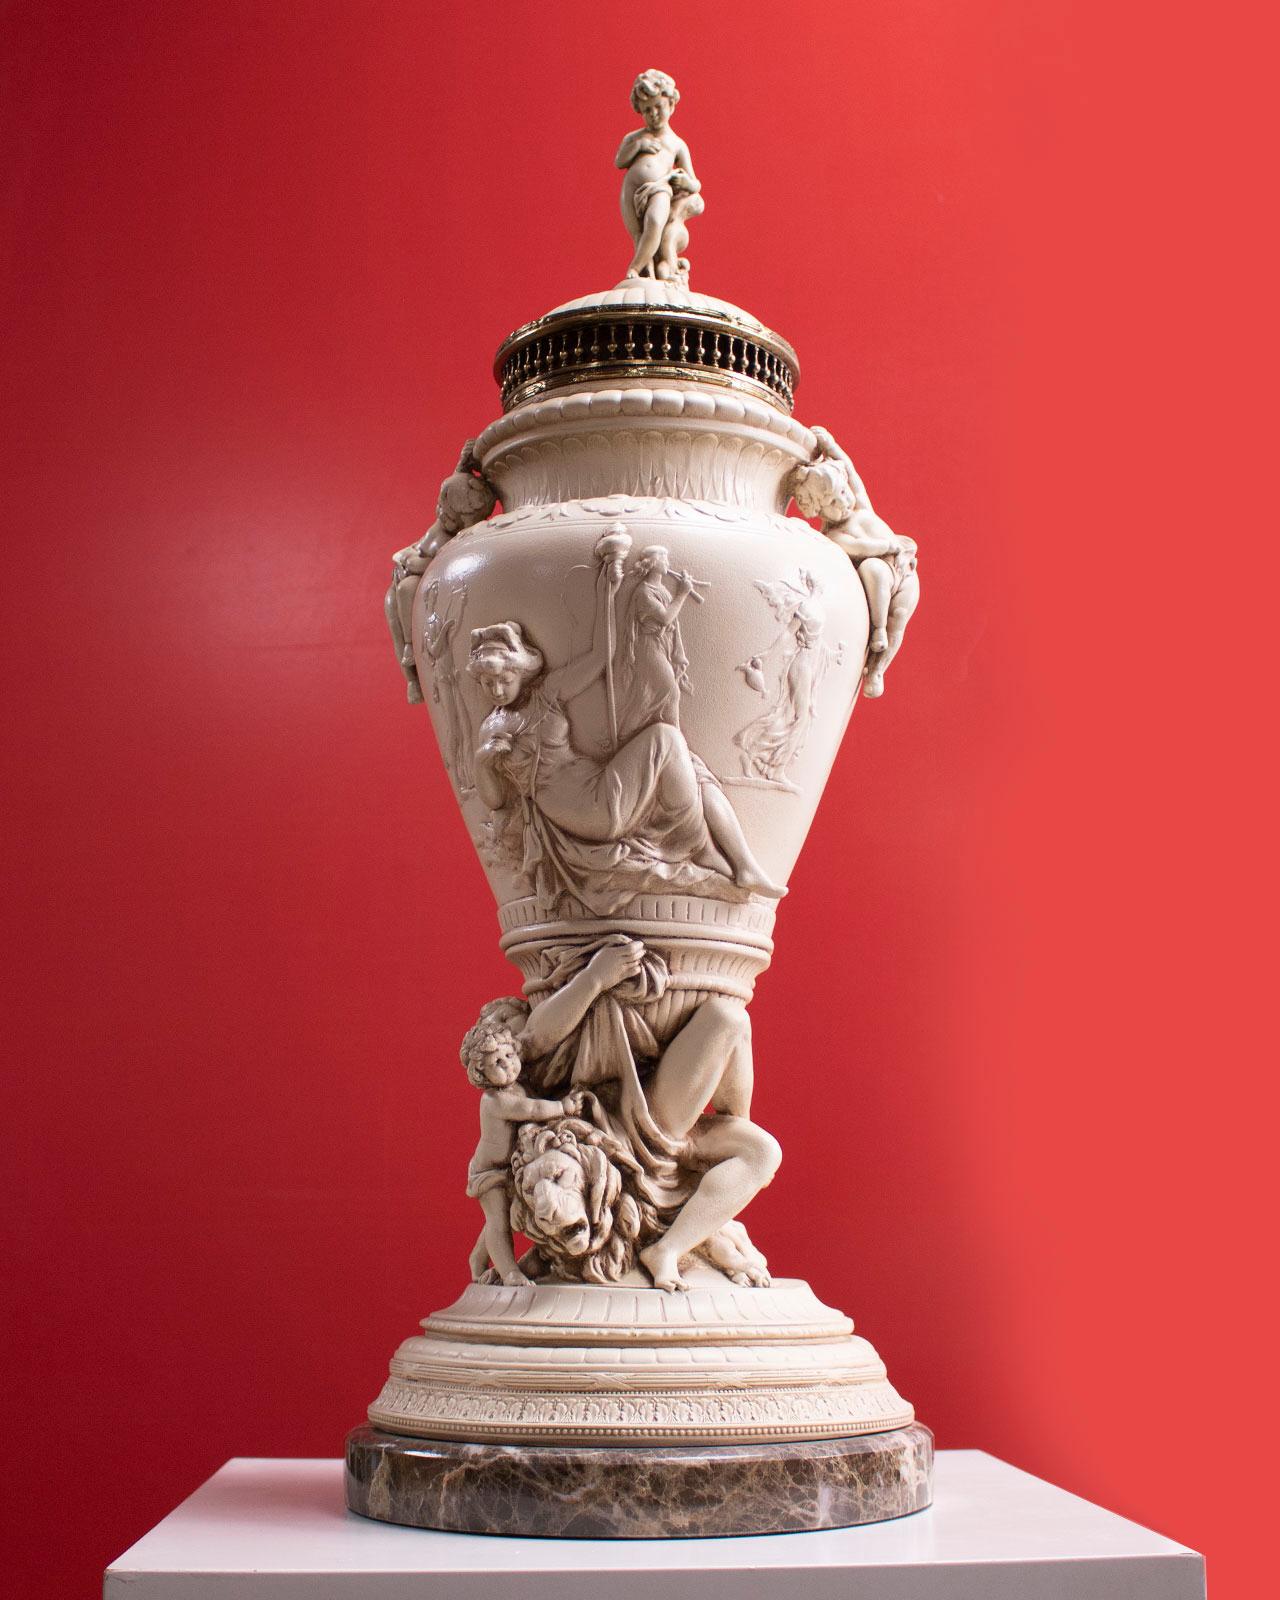 "Neoclassical XIX century vase"
The vase is made of Cold terracotta.

Buysculpture and its collection of antiques in property, presents with this first work this collection of reproductions, with a neoclassical vase from XIX century (approximately